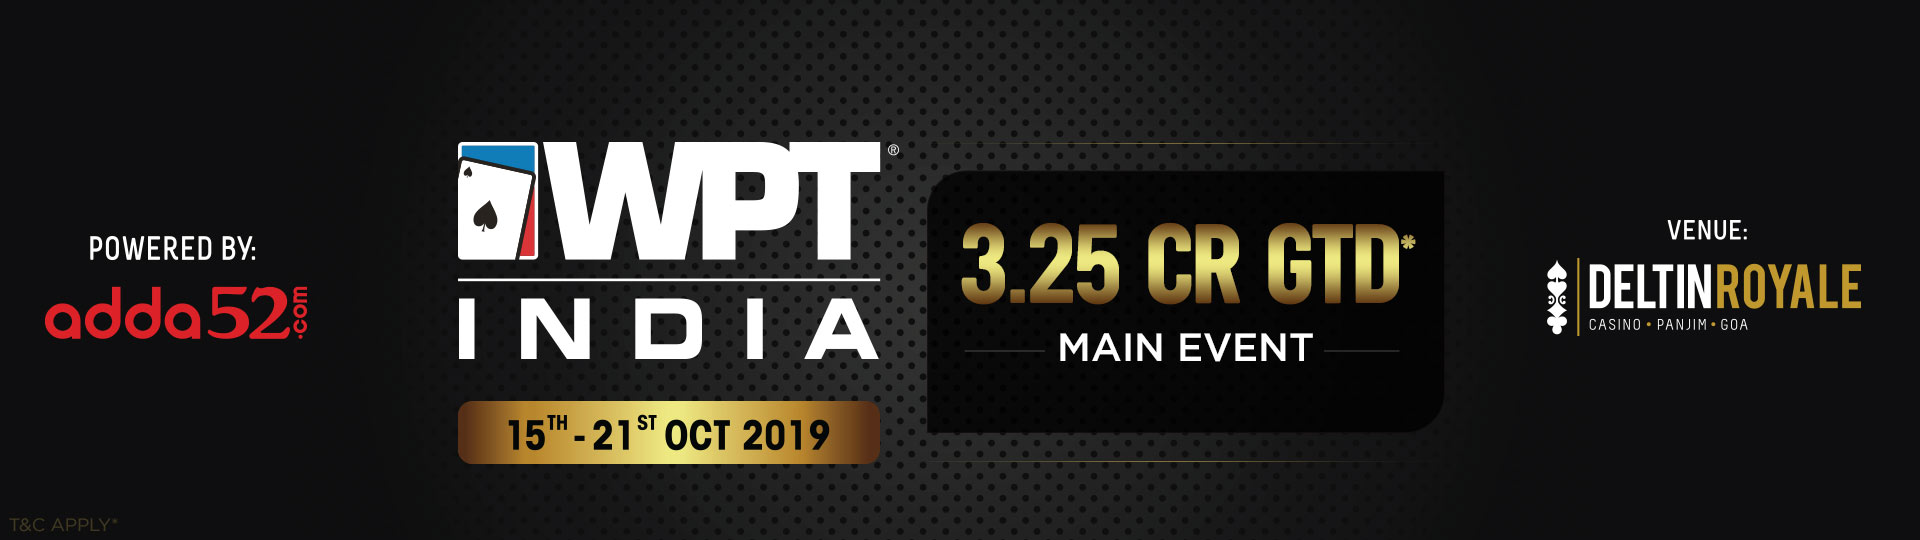 WPT India 2019 at Deltin Royale in Goa-WPT 2019 Schedule